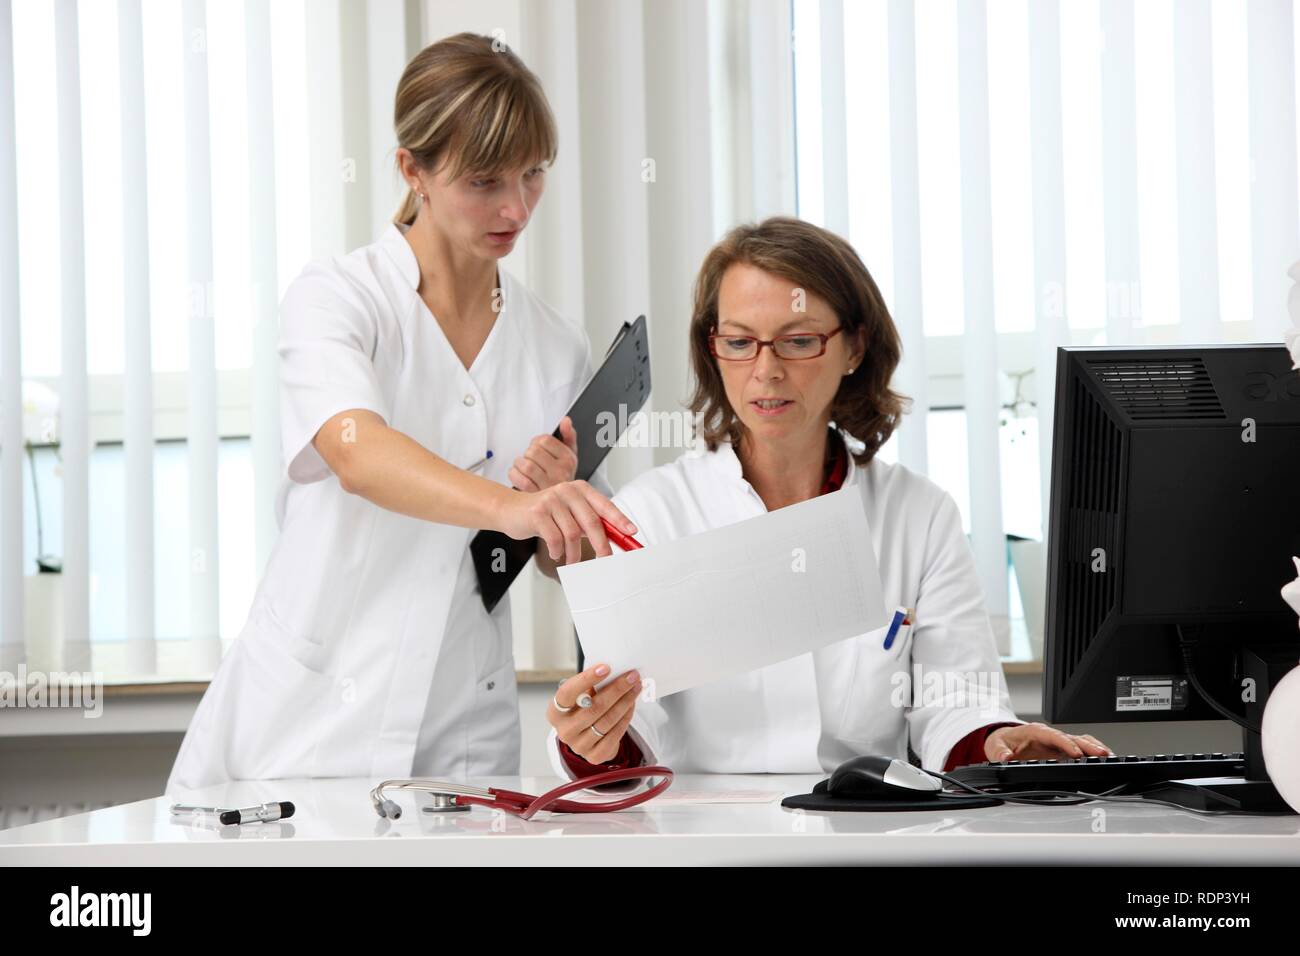 Medical practice, doctor examining the health records of a patient at her desk, discussing them with an assistant Stock Photo